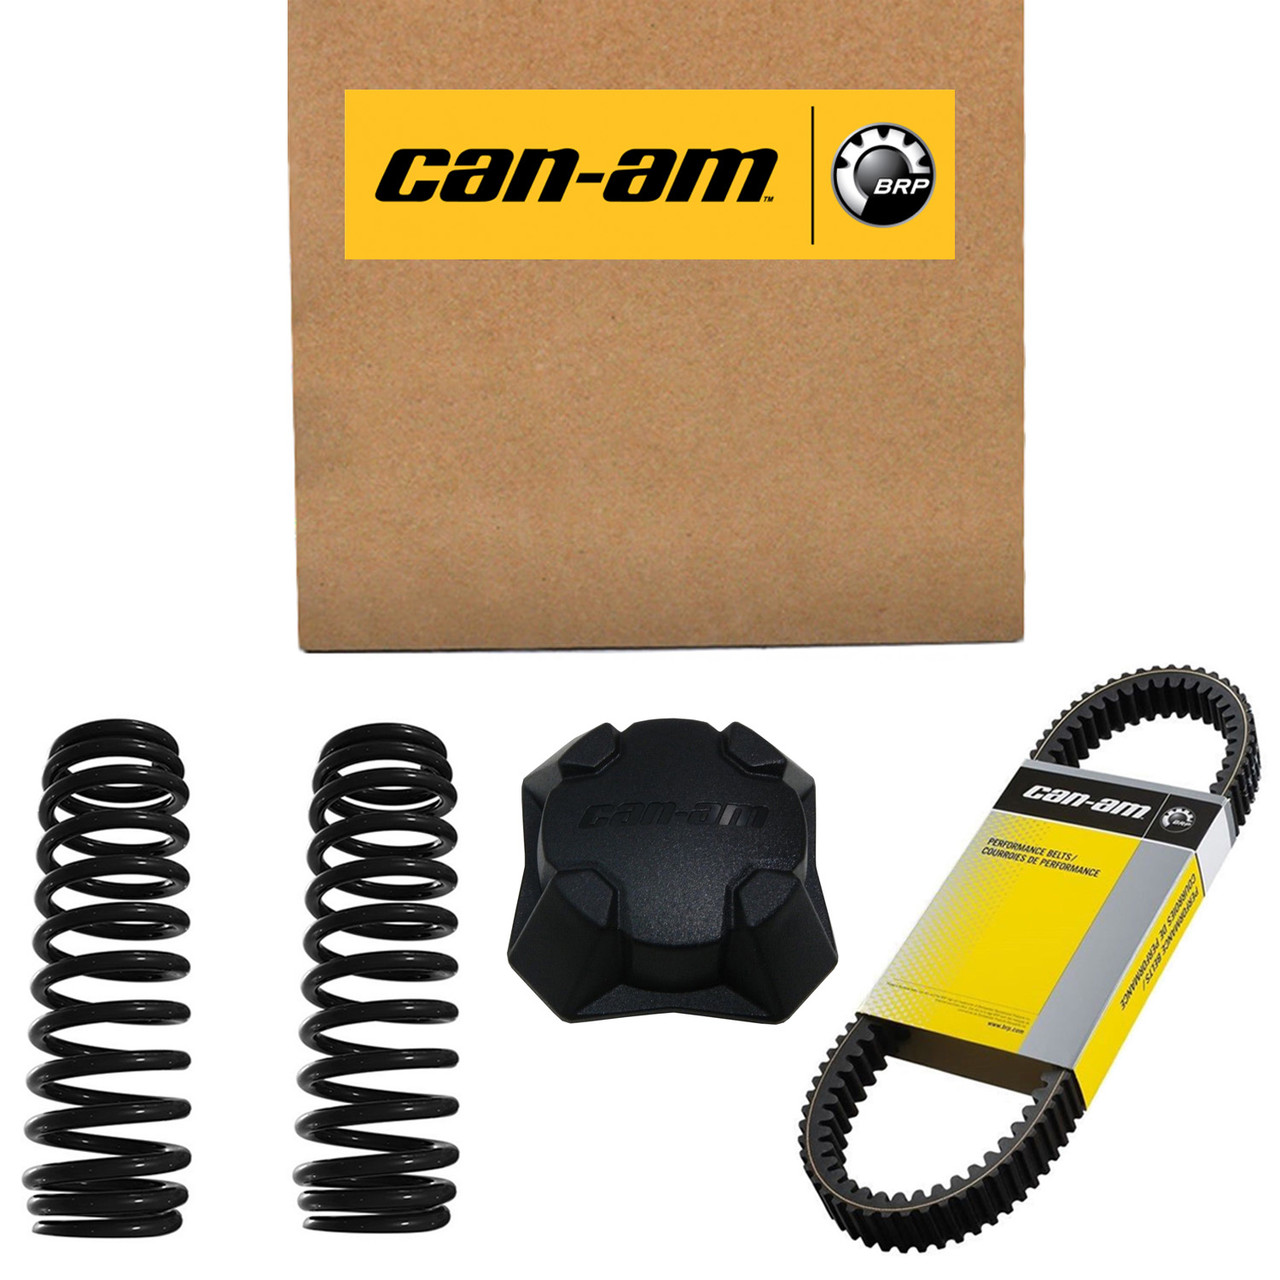 Can-Am New OEM Multifunction Gauge_Full Size Color, 710006937